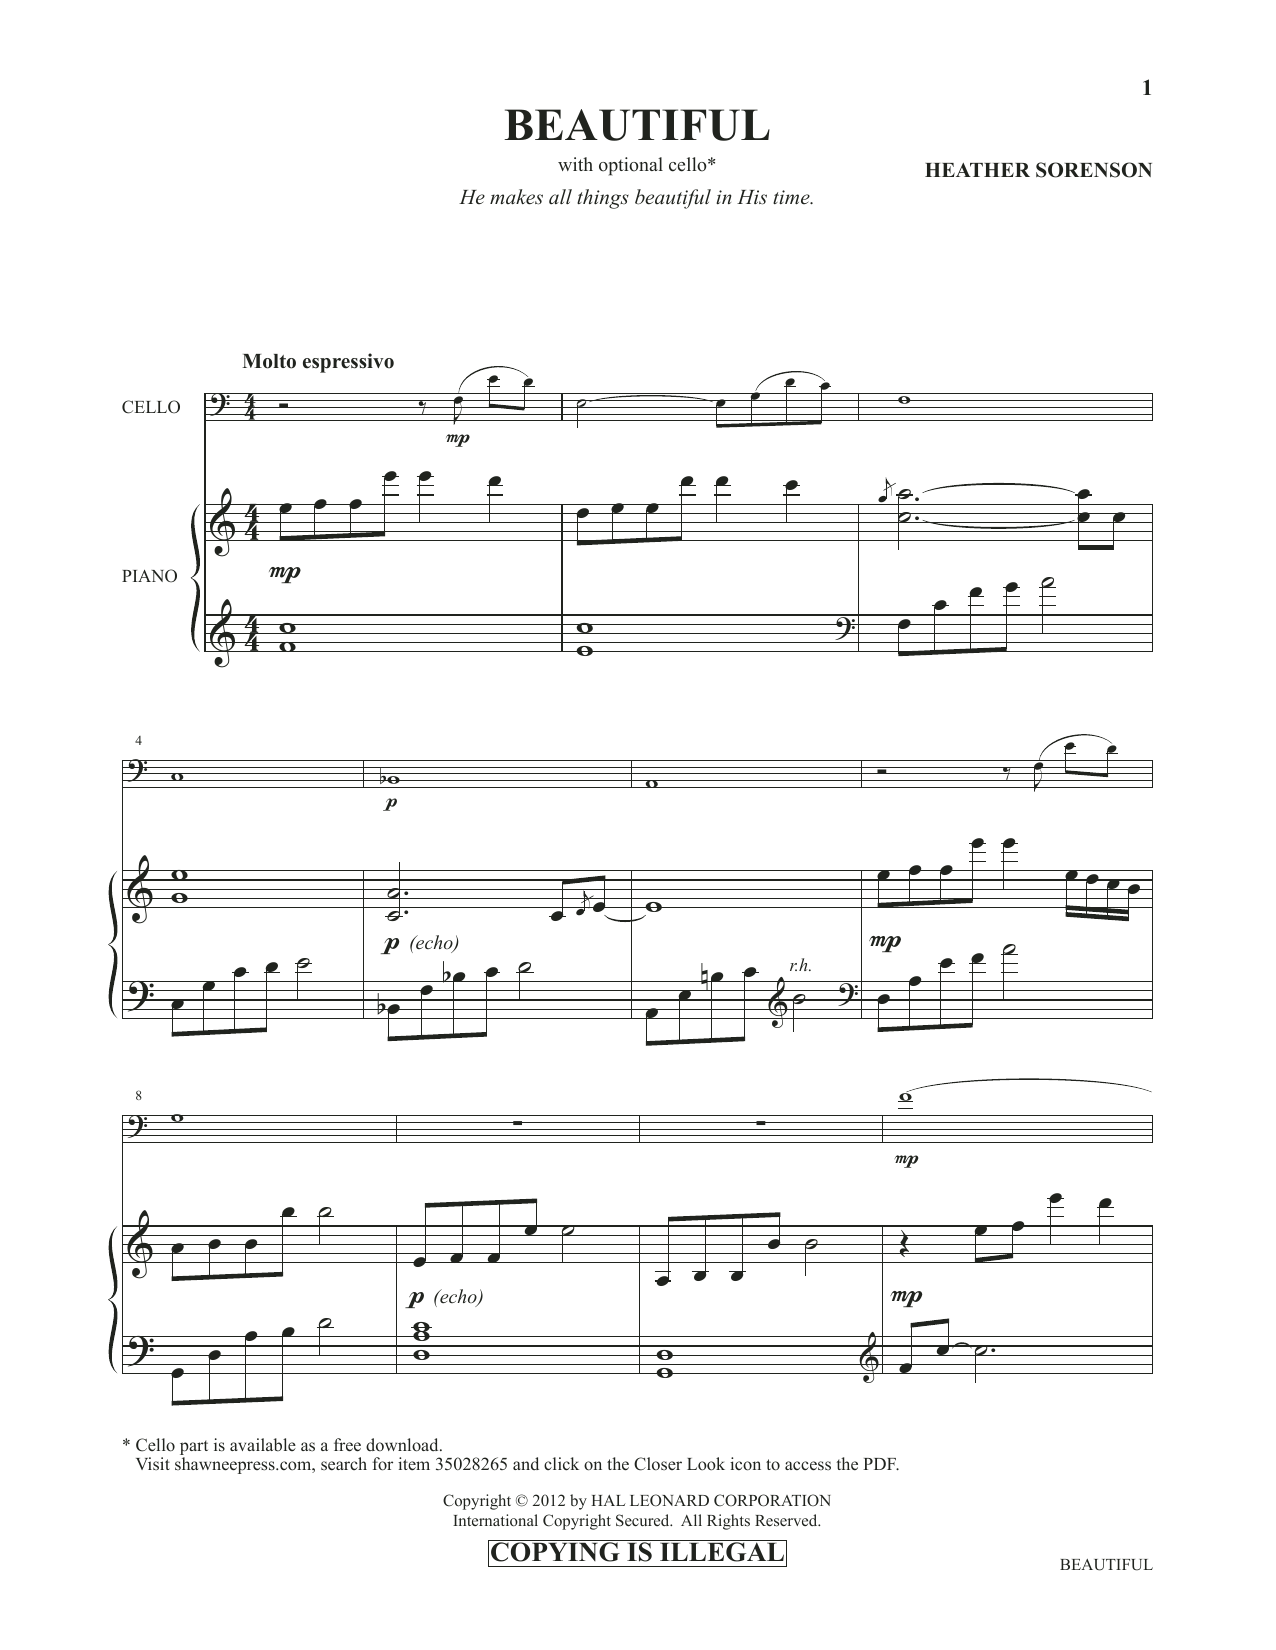 Download Heather Sorenson Images: Sacred Piano Reflections (Colle Sheet Music